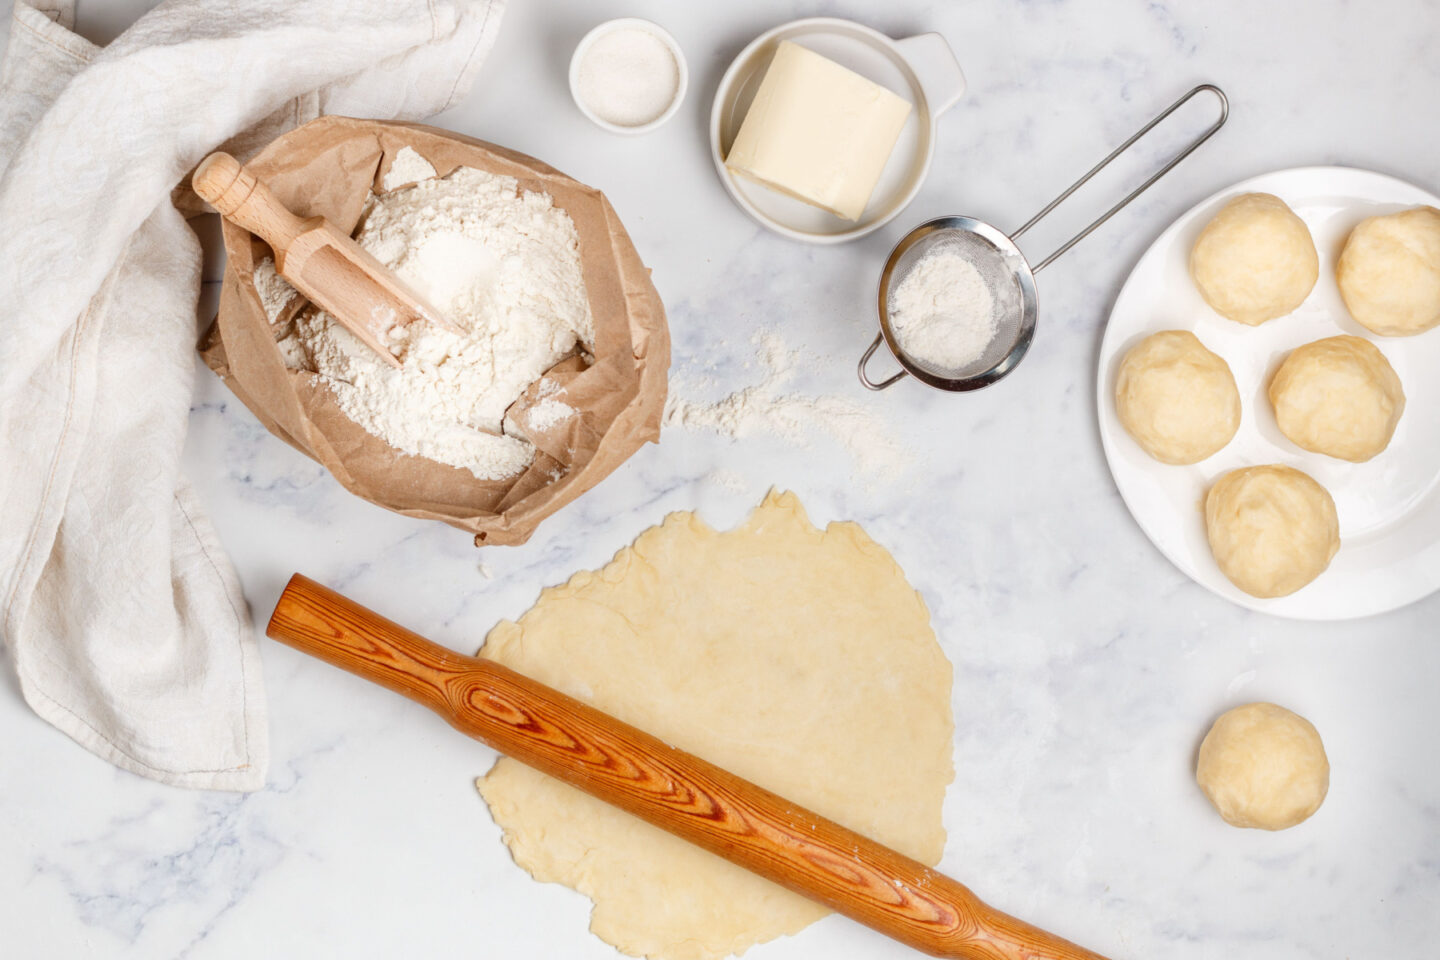 puff pastry dough ingredients